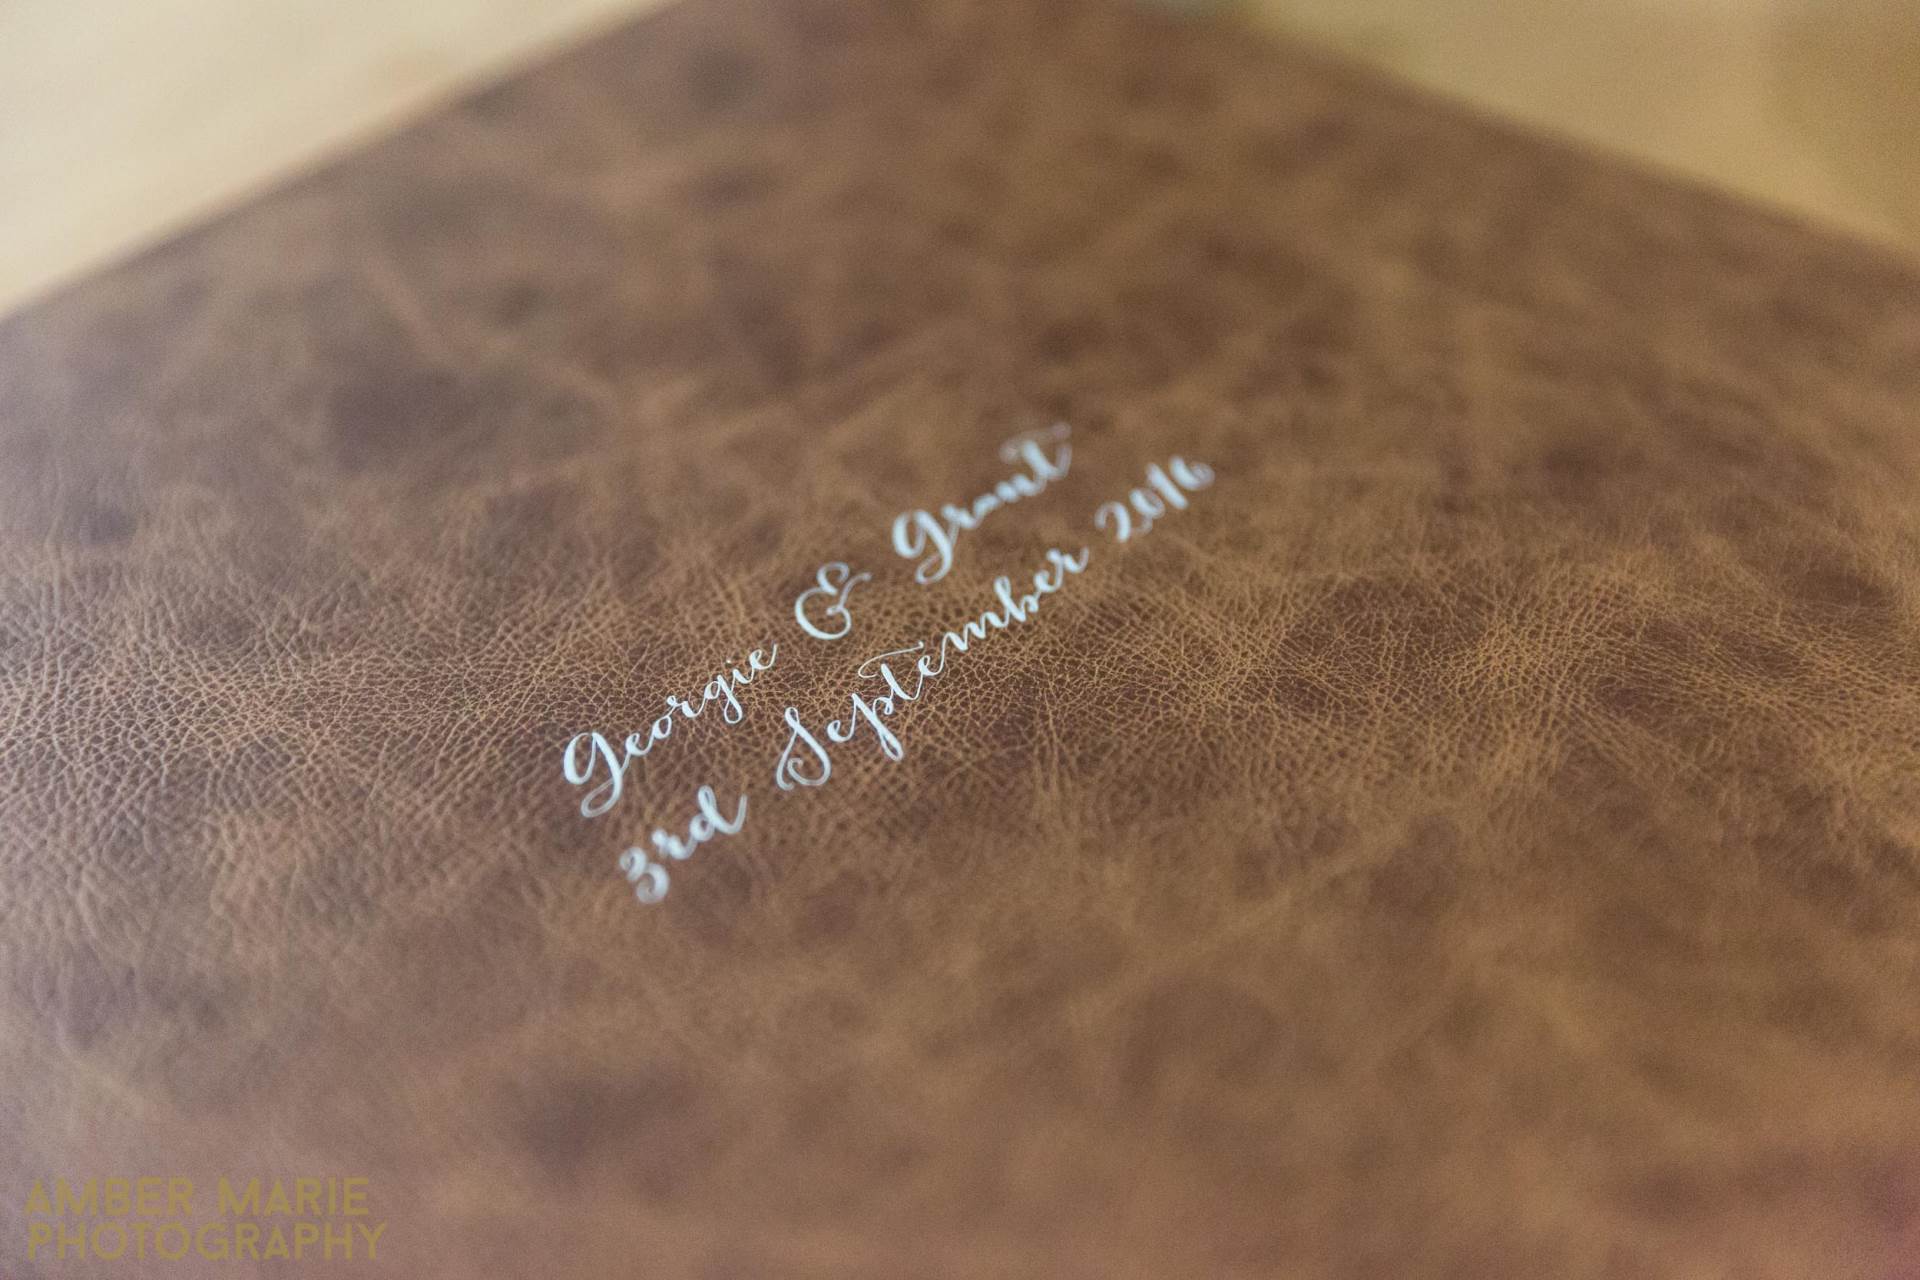 Do you need to order a wedding photo album of your wedding photos by Amber Marie Photography